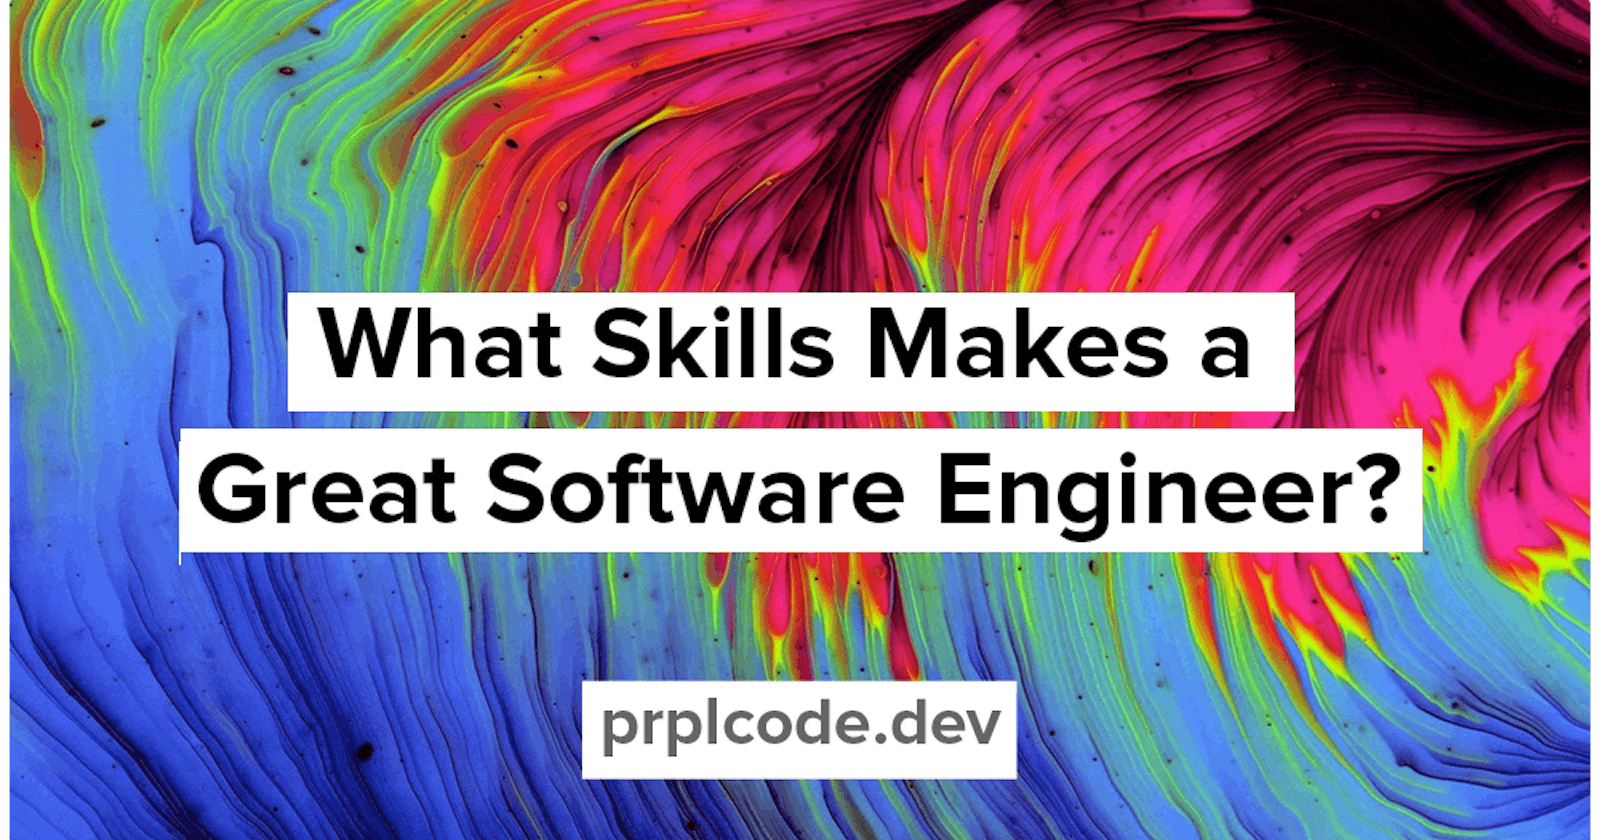 What Skills Makes a Great Software Engineer?